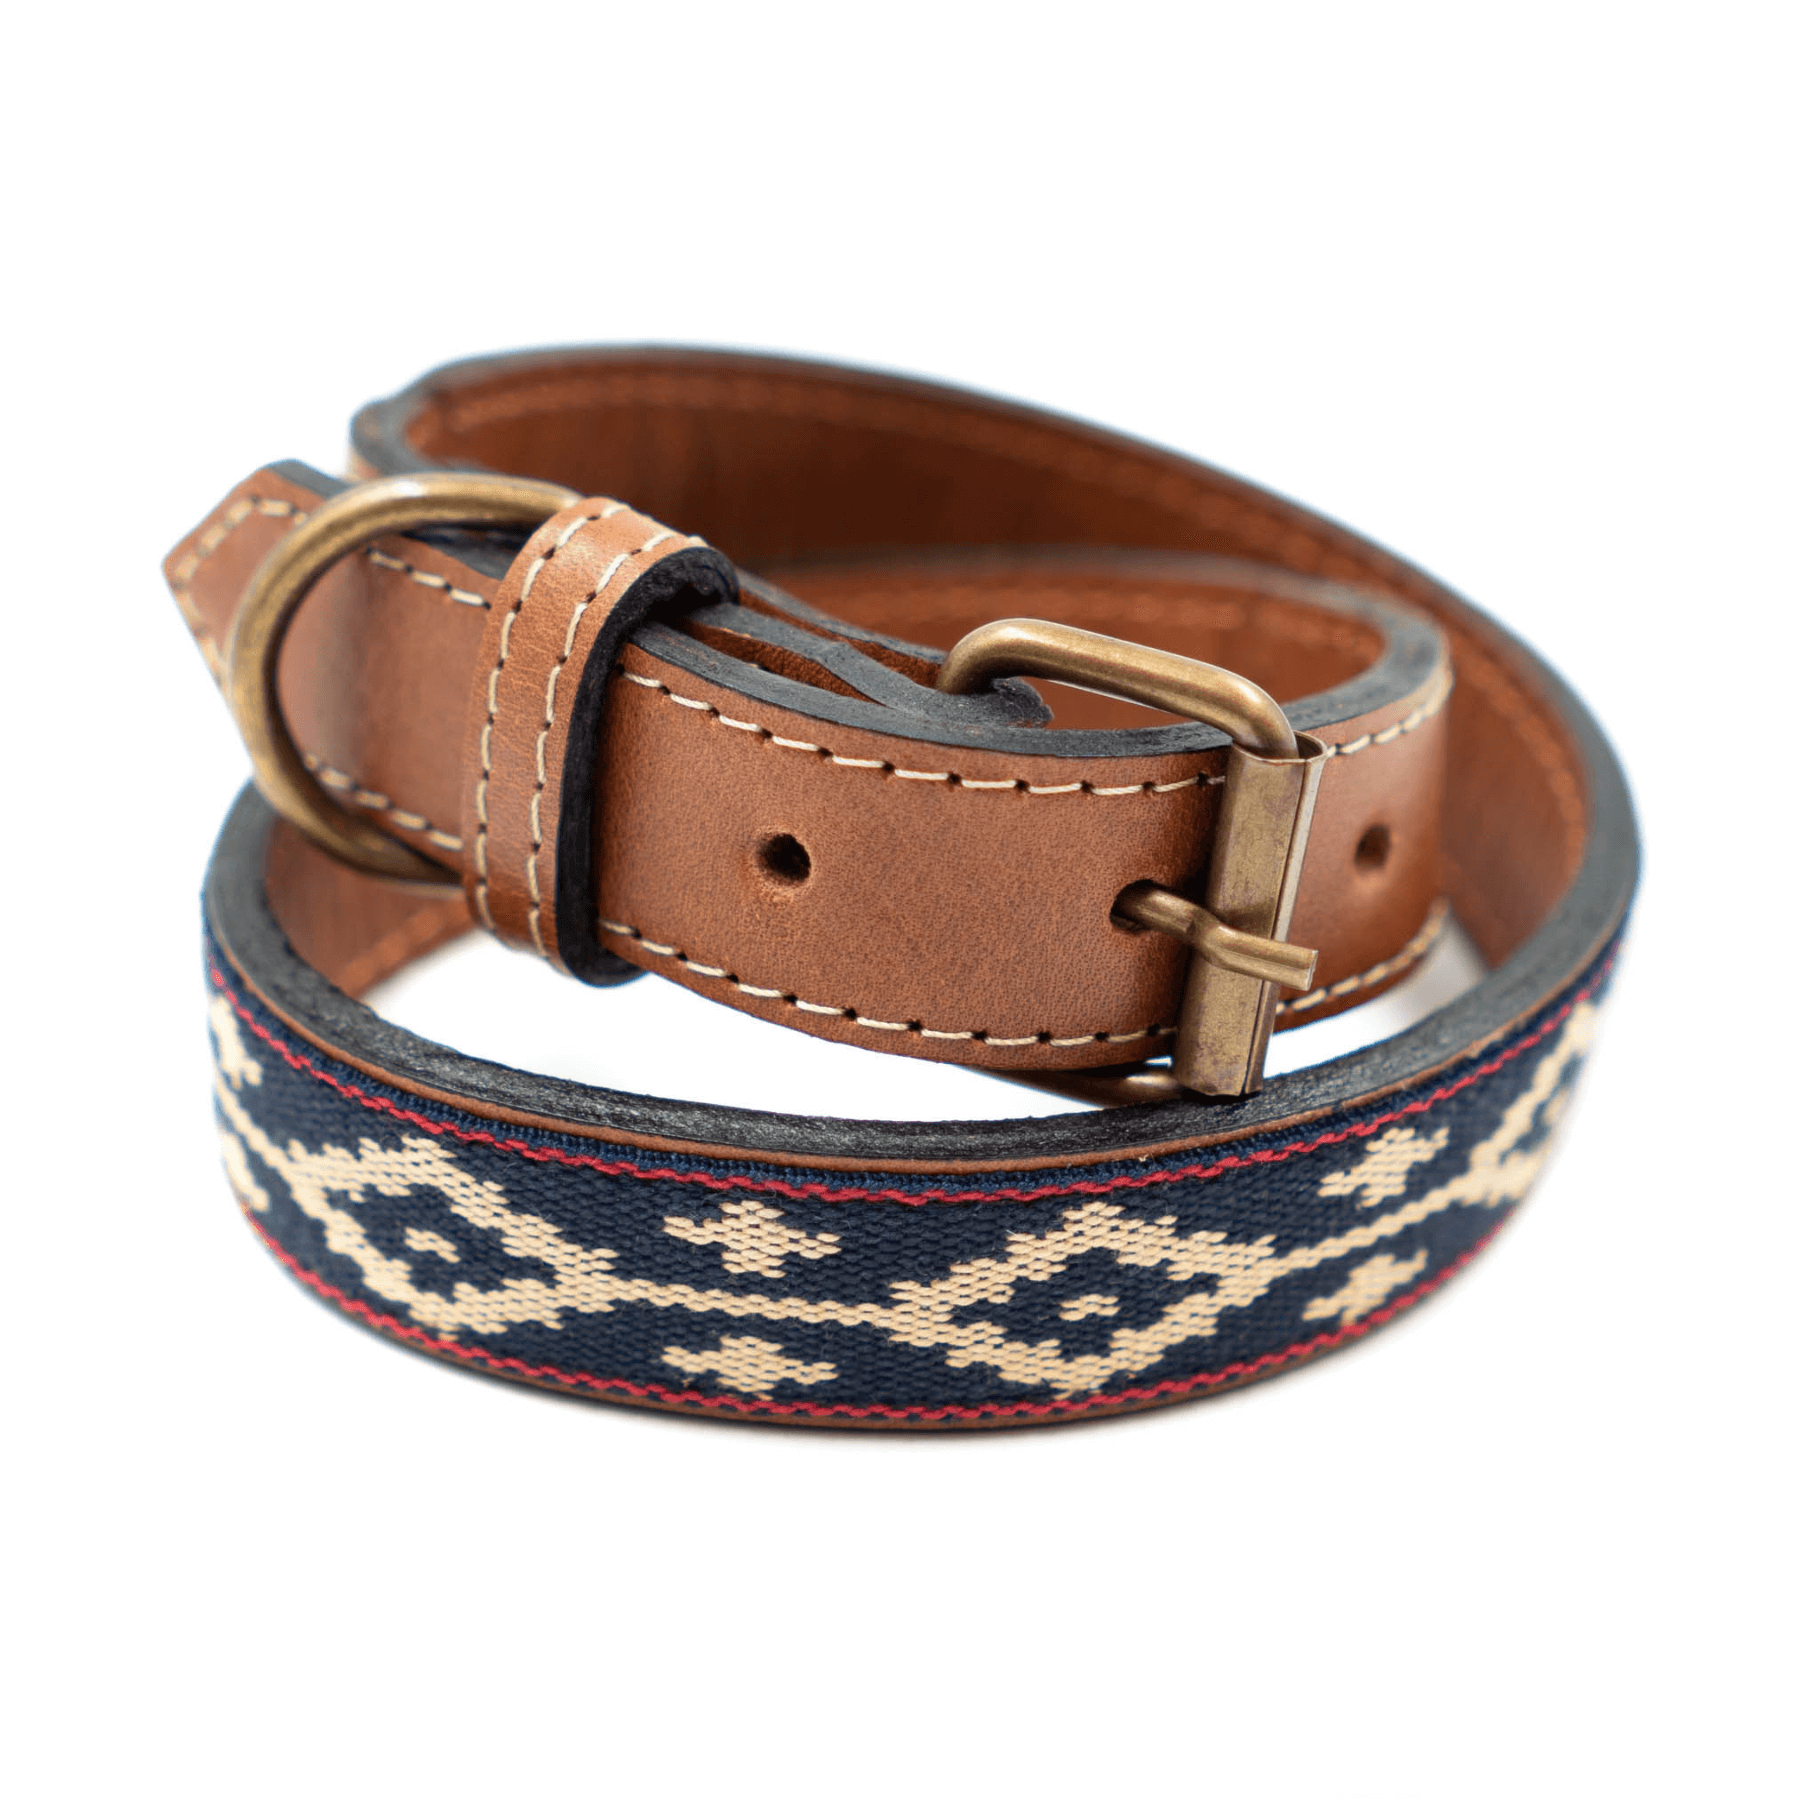 Gaucholife Dogs Guarda Pampas Leather Dog Collar (Blue/Red)